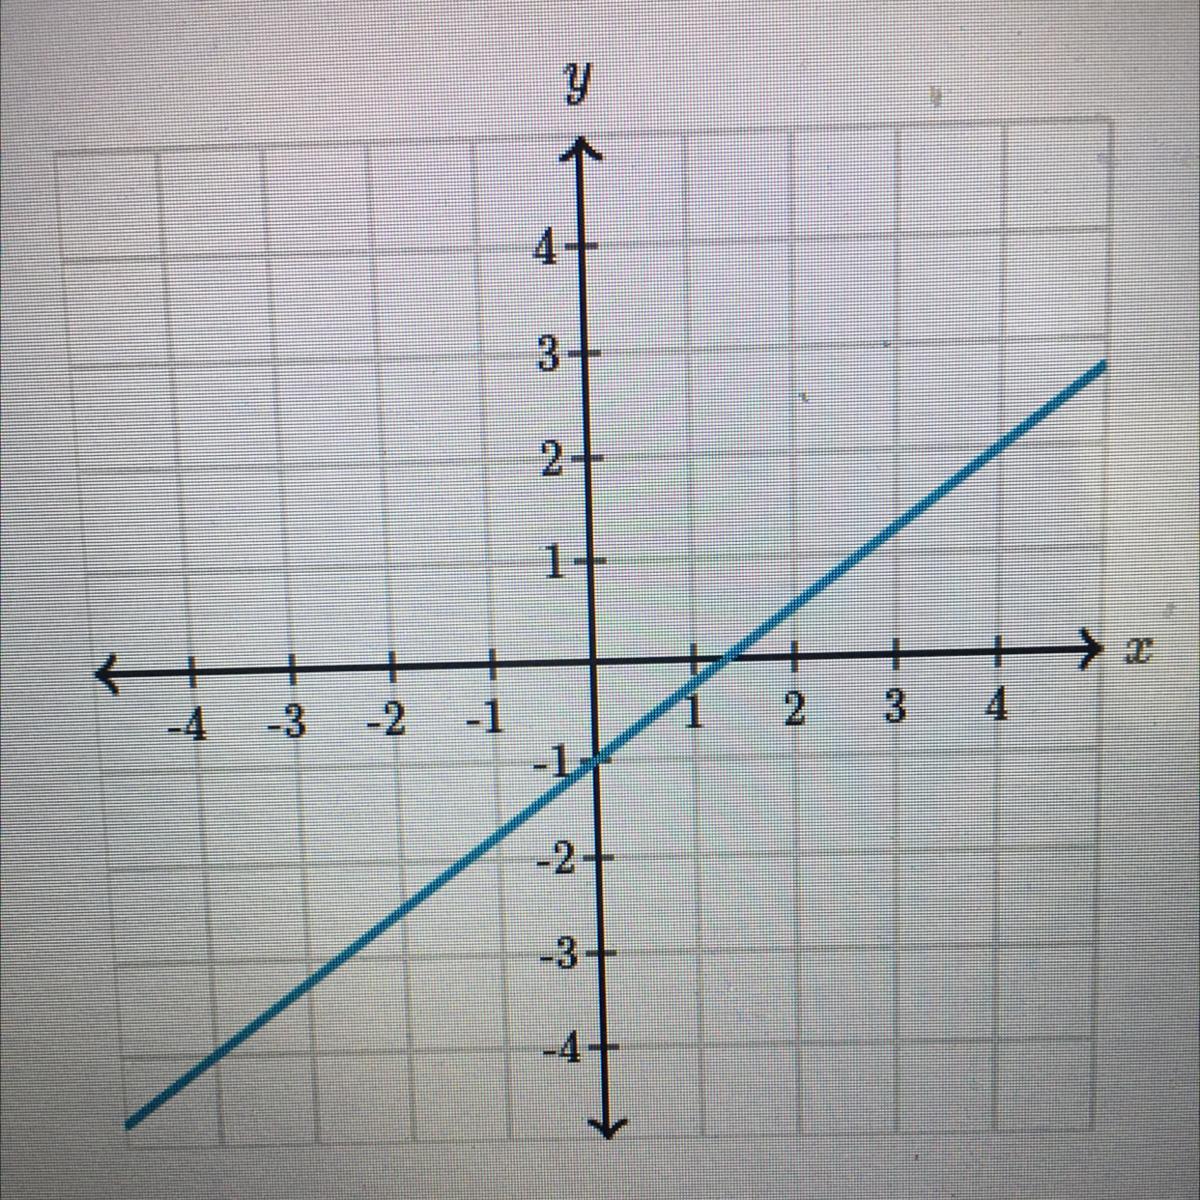 What Is The Slope Of The Line